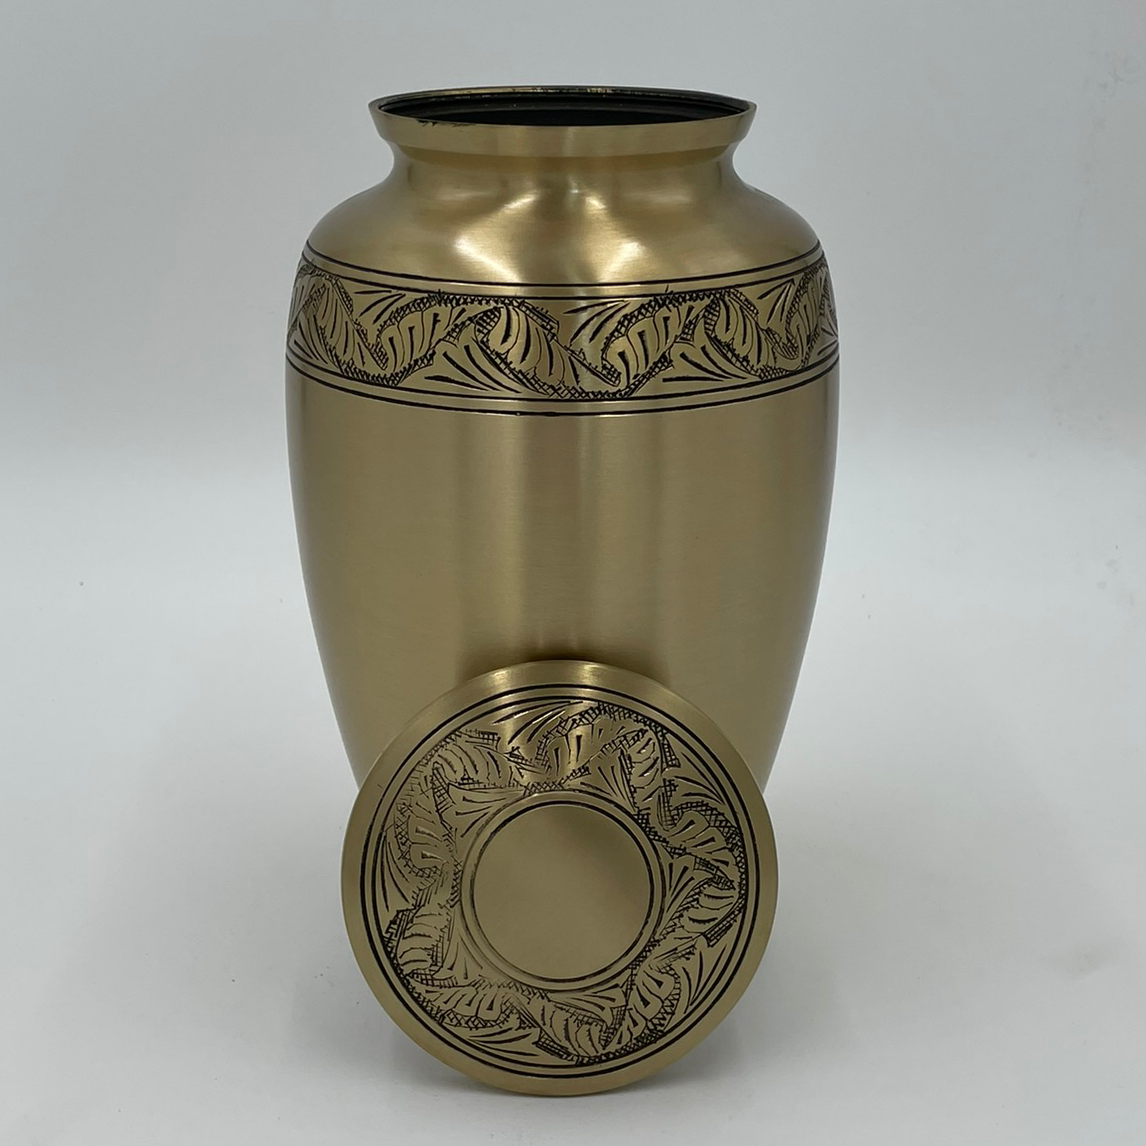 Gold Etched Foliage Urn